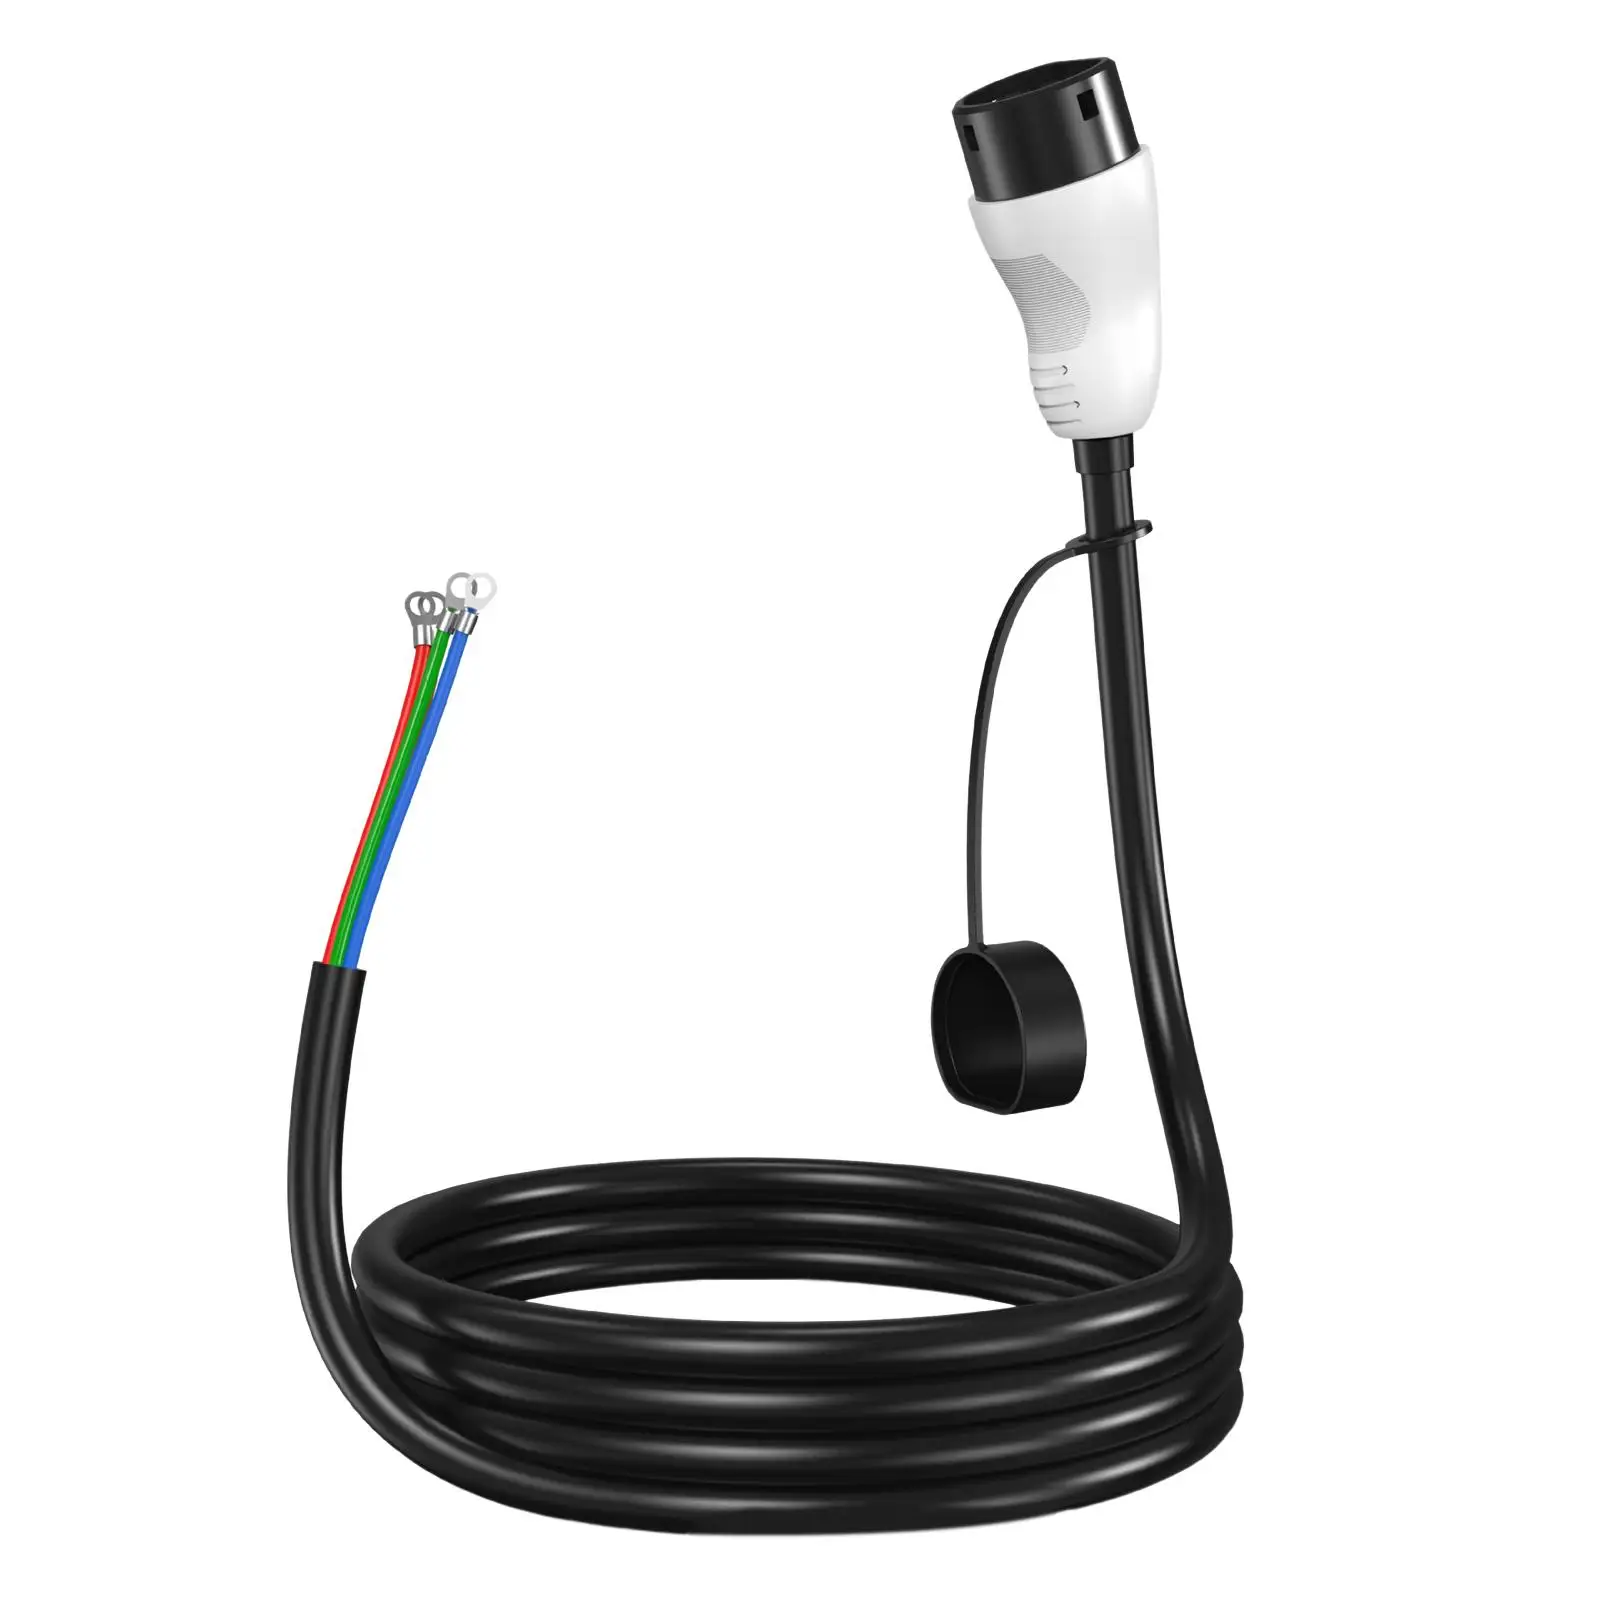 ev Charging Cable Car Charging Station Wire Male Plug Charging Parts 16ft EU Standard Waterproof Single Phase Flexible